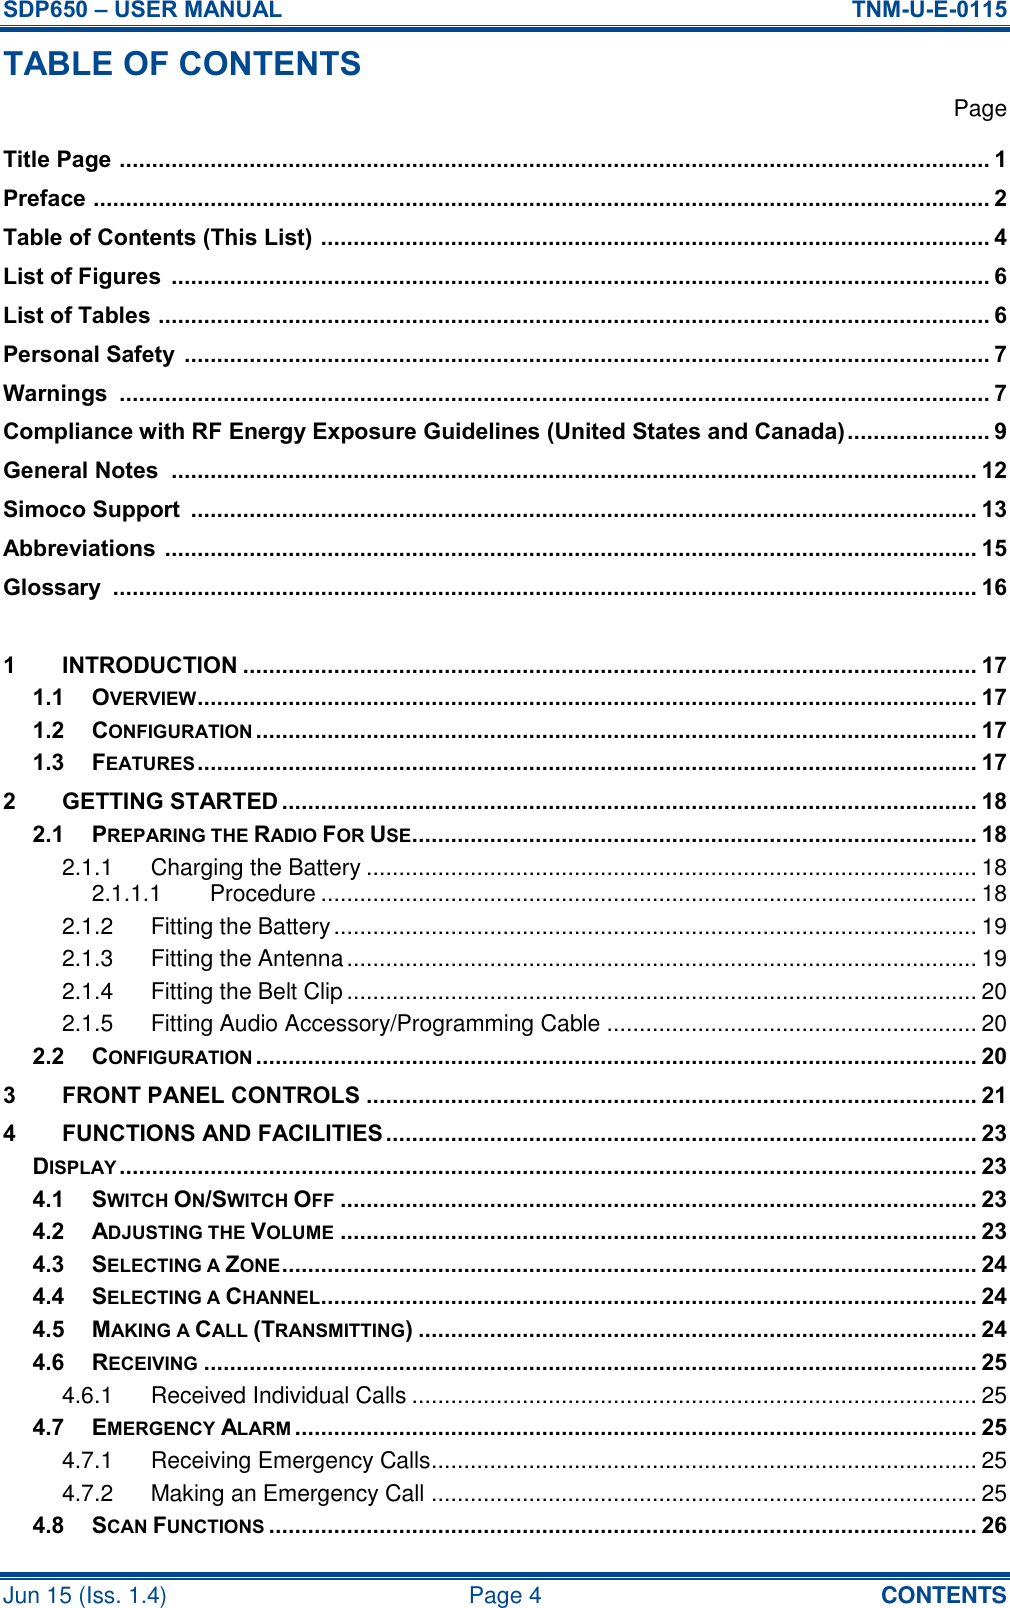 SDP650 – USER MANUAL  TNM-U-E-0115 Jun 15 (Iss. 1.4)  Page 4  CONTENTS TABLE OF CONTENTS   Page Title Page  ...................................................................................................................................... 1 Preface  .......................................................................................................................................... 2 Table of Contents (This List)  ....................................................................................................... 4 List of Figures  .............................................................................................................................. 6 List of Tables  ................................................................................................................................ 6 Personal Safety  ............................................................................................................................ 7 Warnings  ...................................................................................................................................... 7 Compliance with RF Energy Exposure Guidelines (United States and Canada) ...................... 9 General Notes  ............................................................................................................................ 12 Simoco Support  ......................................................................................................................... 13 Abbreviations  ............................................................................................................................. 15 Glossary  ..................................................................................................................................... 16  1 INTRODUCTION ................................................................................................................. 17 1.1 OVERVIEW ........................................................................................................................ 17 1.2 CONFIGURATION ............................................................................................................... 17 1.3 FEATURES ........................................................................................................................ 17 2 GETTING STARTED ........................................................................................................... 18 2.1 PREPARING THE RADIO FOR USE....................................................................................... 18 2.1.1 Charging the Battery .............................................................................................. 18 2.1.1.1 Procedure ..................................................................................................... 18 2.1.2 Fitting the Battery ................................................................................................... 19 2.1.3 Fitting the Antenna ................................................................................................. 19 2.1.4 Fitting the Belt Clip ................................................................................................. 20 2.1.5 Fitting Audio Accessory/Programming Cable ......................................................... 20 2.2 CONFIGURATION ............................................................................................................... 20 3 FRONT PANEL CONTROLS .............................................................................................. 21 4 FUNCTIONS AND FACILITIES ........................................................................................... 23 DISPLAY .................................................................................................................................... 23 4.1 SWITCH ON/SWITCH OFF .................................................................................................. 23 4.2 ADJUSTING THE VOLUME .................................................................................................. 23 4.3 SELECTING A ZONE ........................................................................................................... 24 4.4 SELECTING A CHANNEL..................................................................................................... 24 4.5 MAKING A CALL (TRANSMITTING) ...................................................................................... 24 4.6 RECEIVING ....................................................................................................................... 25 4.6.1 Received Individual Calls ....................................................................................... 25 4.7 EMERGENCY ALARM ......................................................................................................... 25 4.7.1 Receiving Emergency Calls.................................................................................... 25 4.7.2 Making an Emergency Call .................................................................................... 25 4.8 SCAN FUNCTIONS ............................................................................................................. 26 